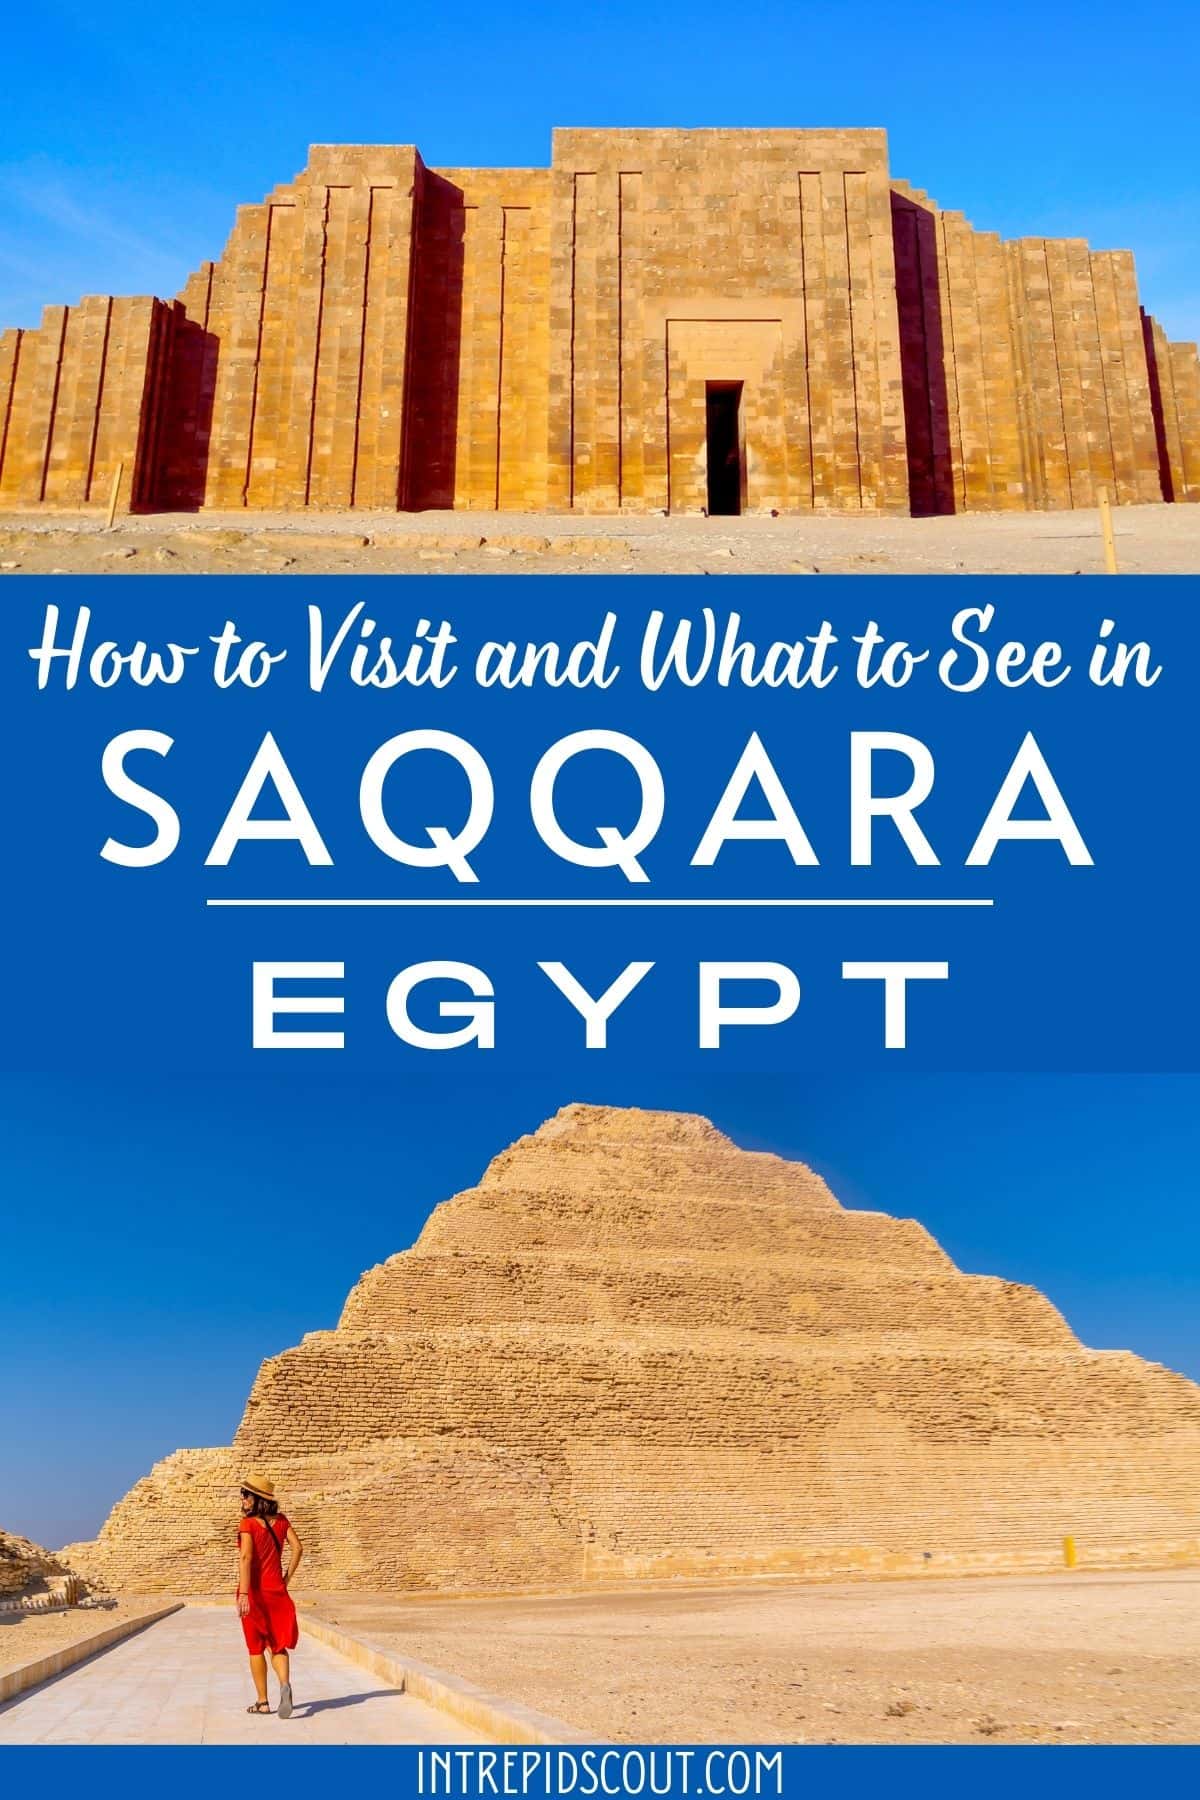 How to Visit and What to See in Saqqara